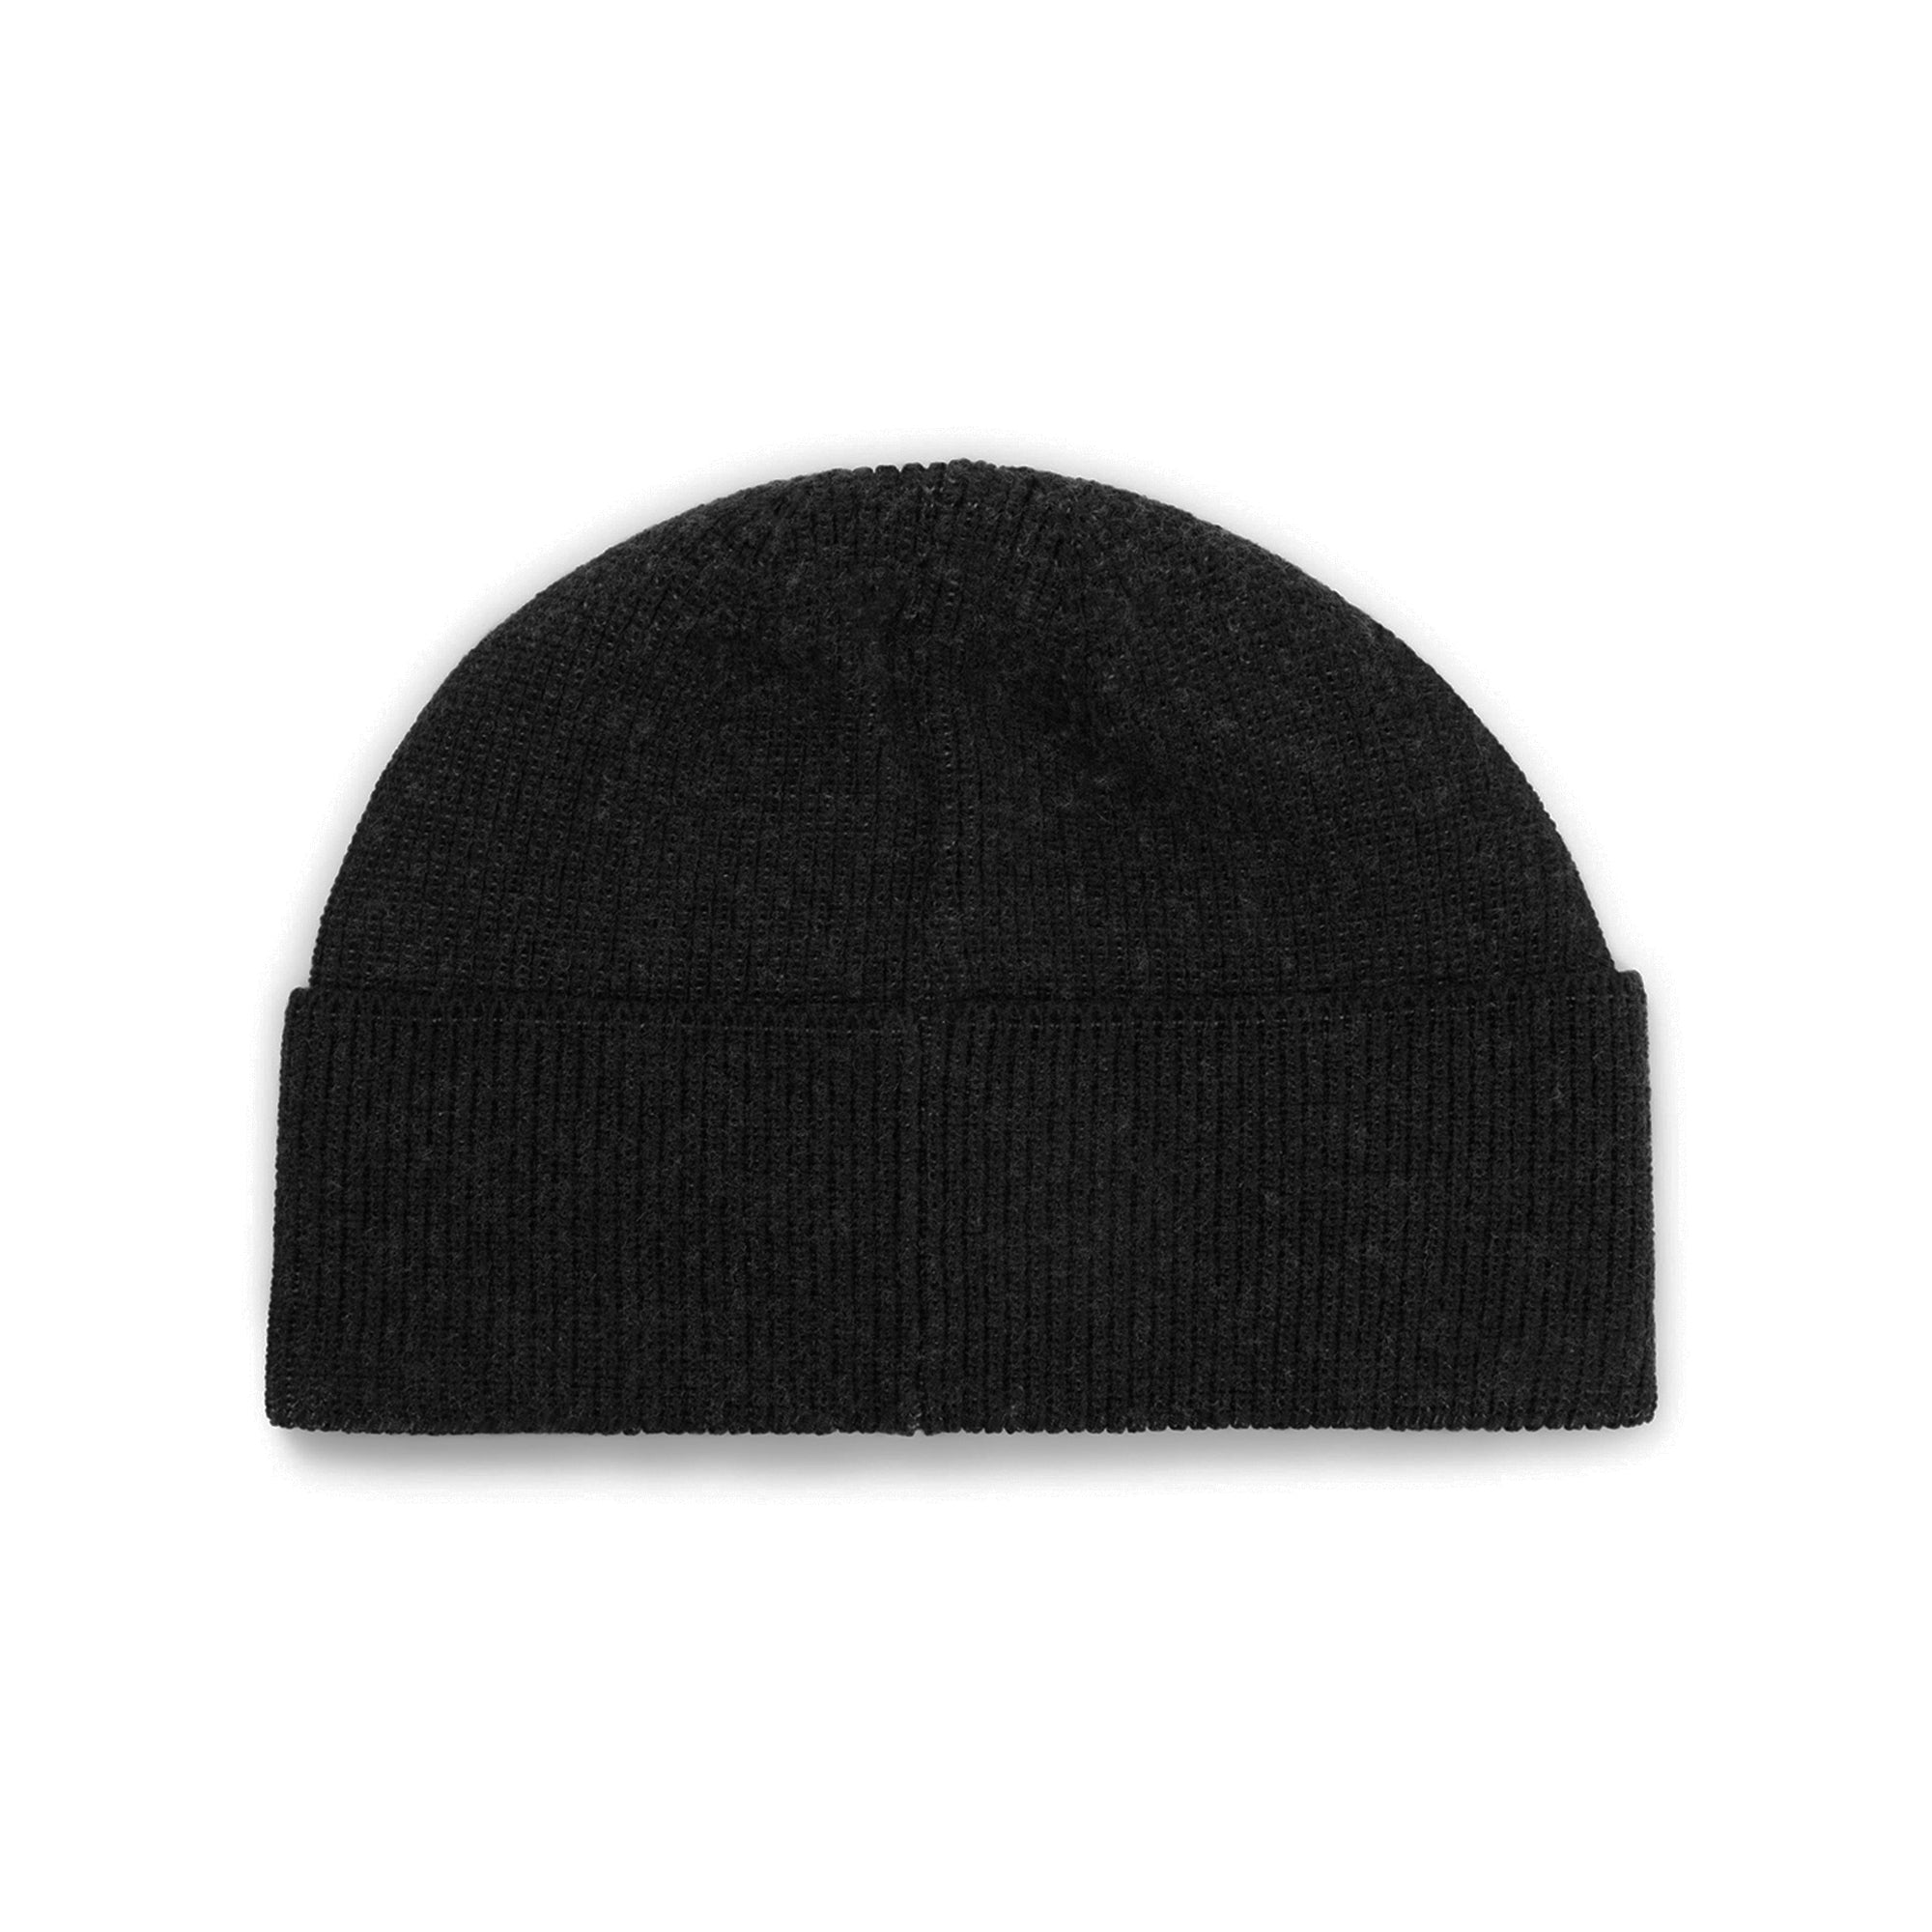 BOSS Lamico Knitted Beanie 001 Hat 50495296 | Function18 Black